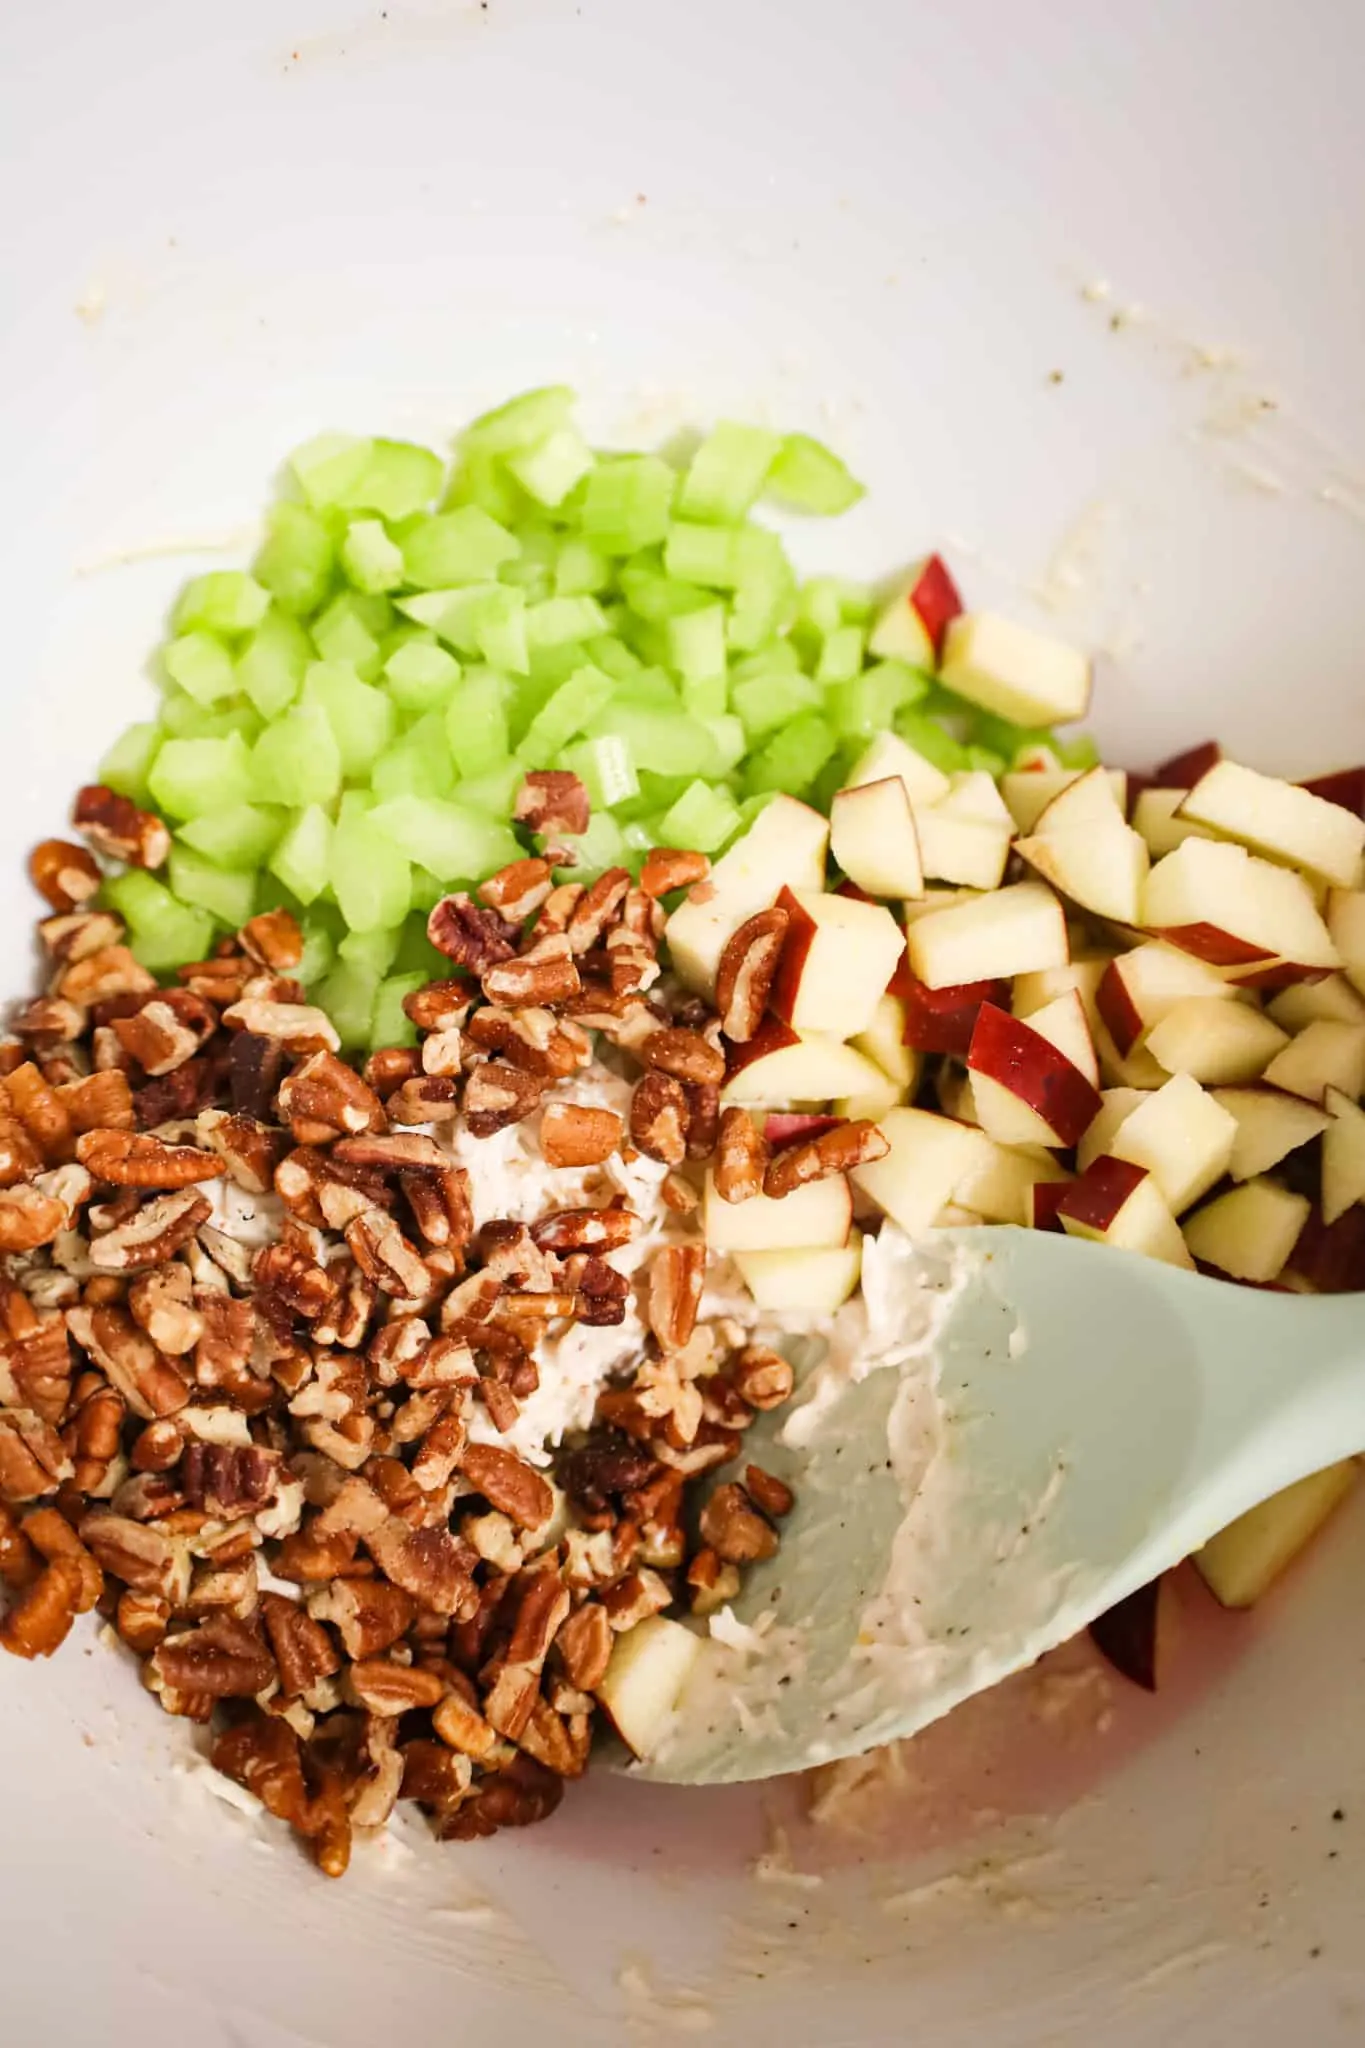 pecan pieces, diced celery and diced apples on top of shredded chicken and mayo mixture in a mixing bowl